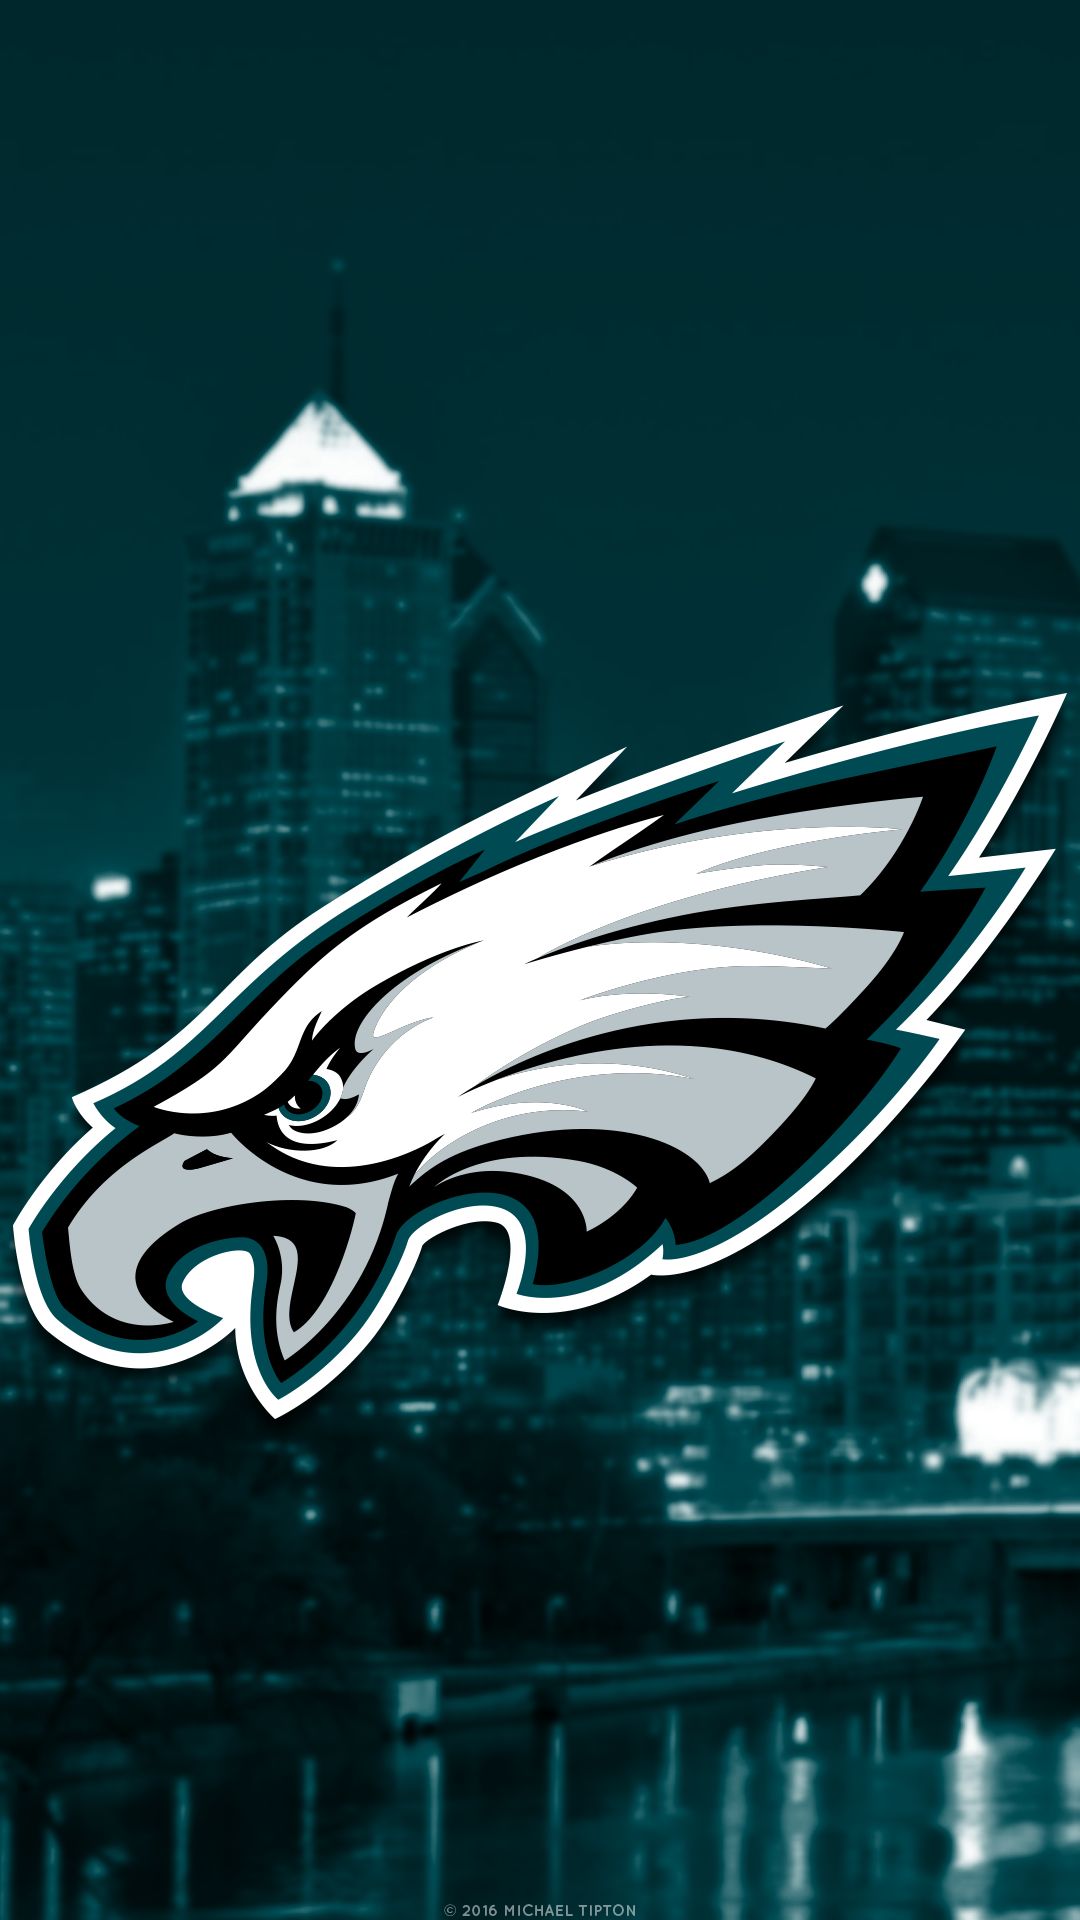 Download 'Philadelphia Eagles' wallpapers for mobile phone, free